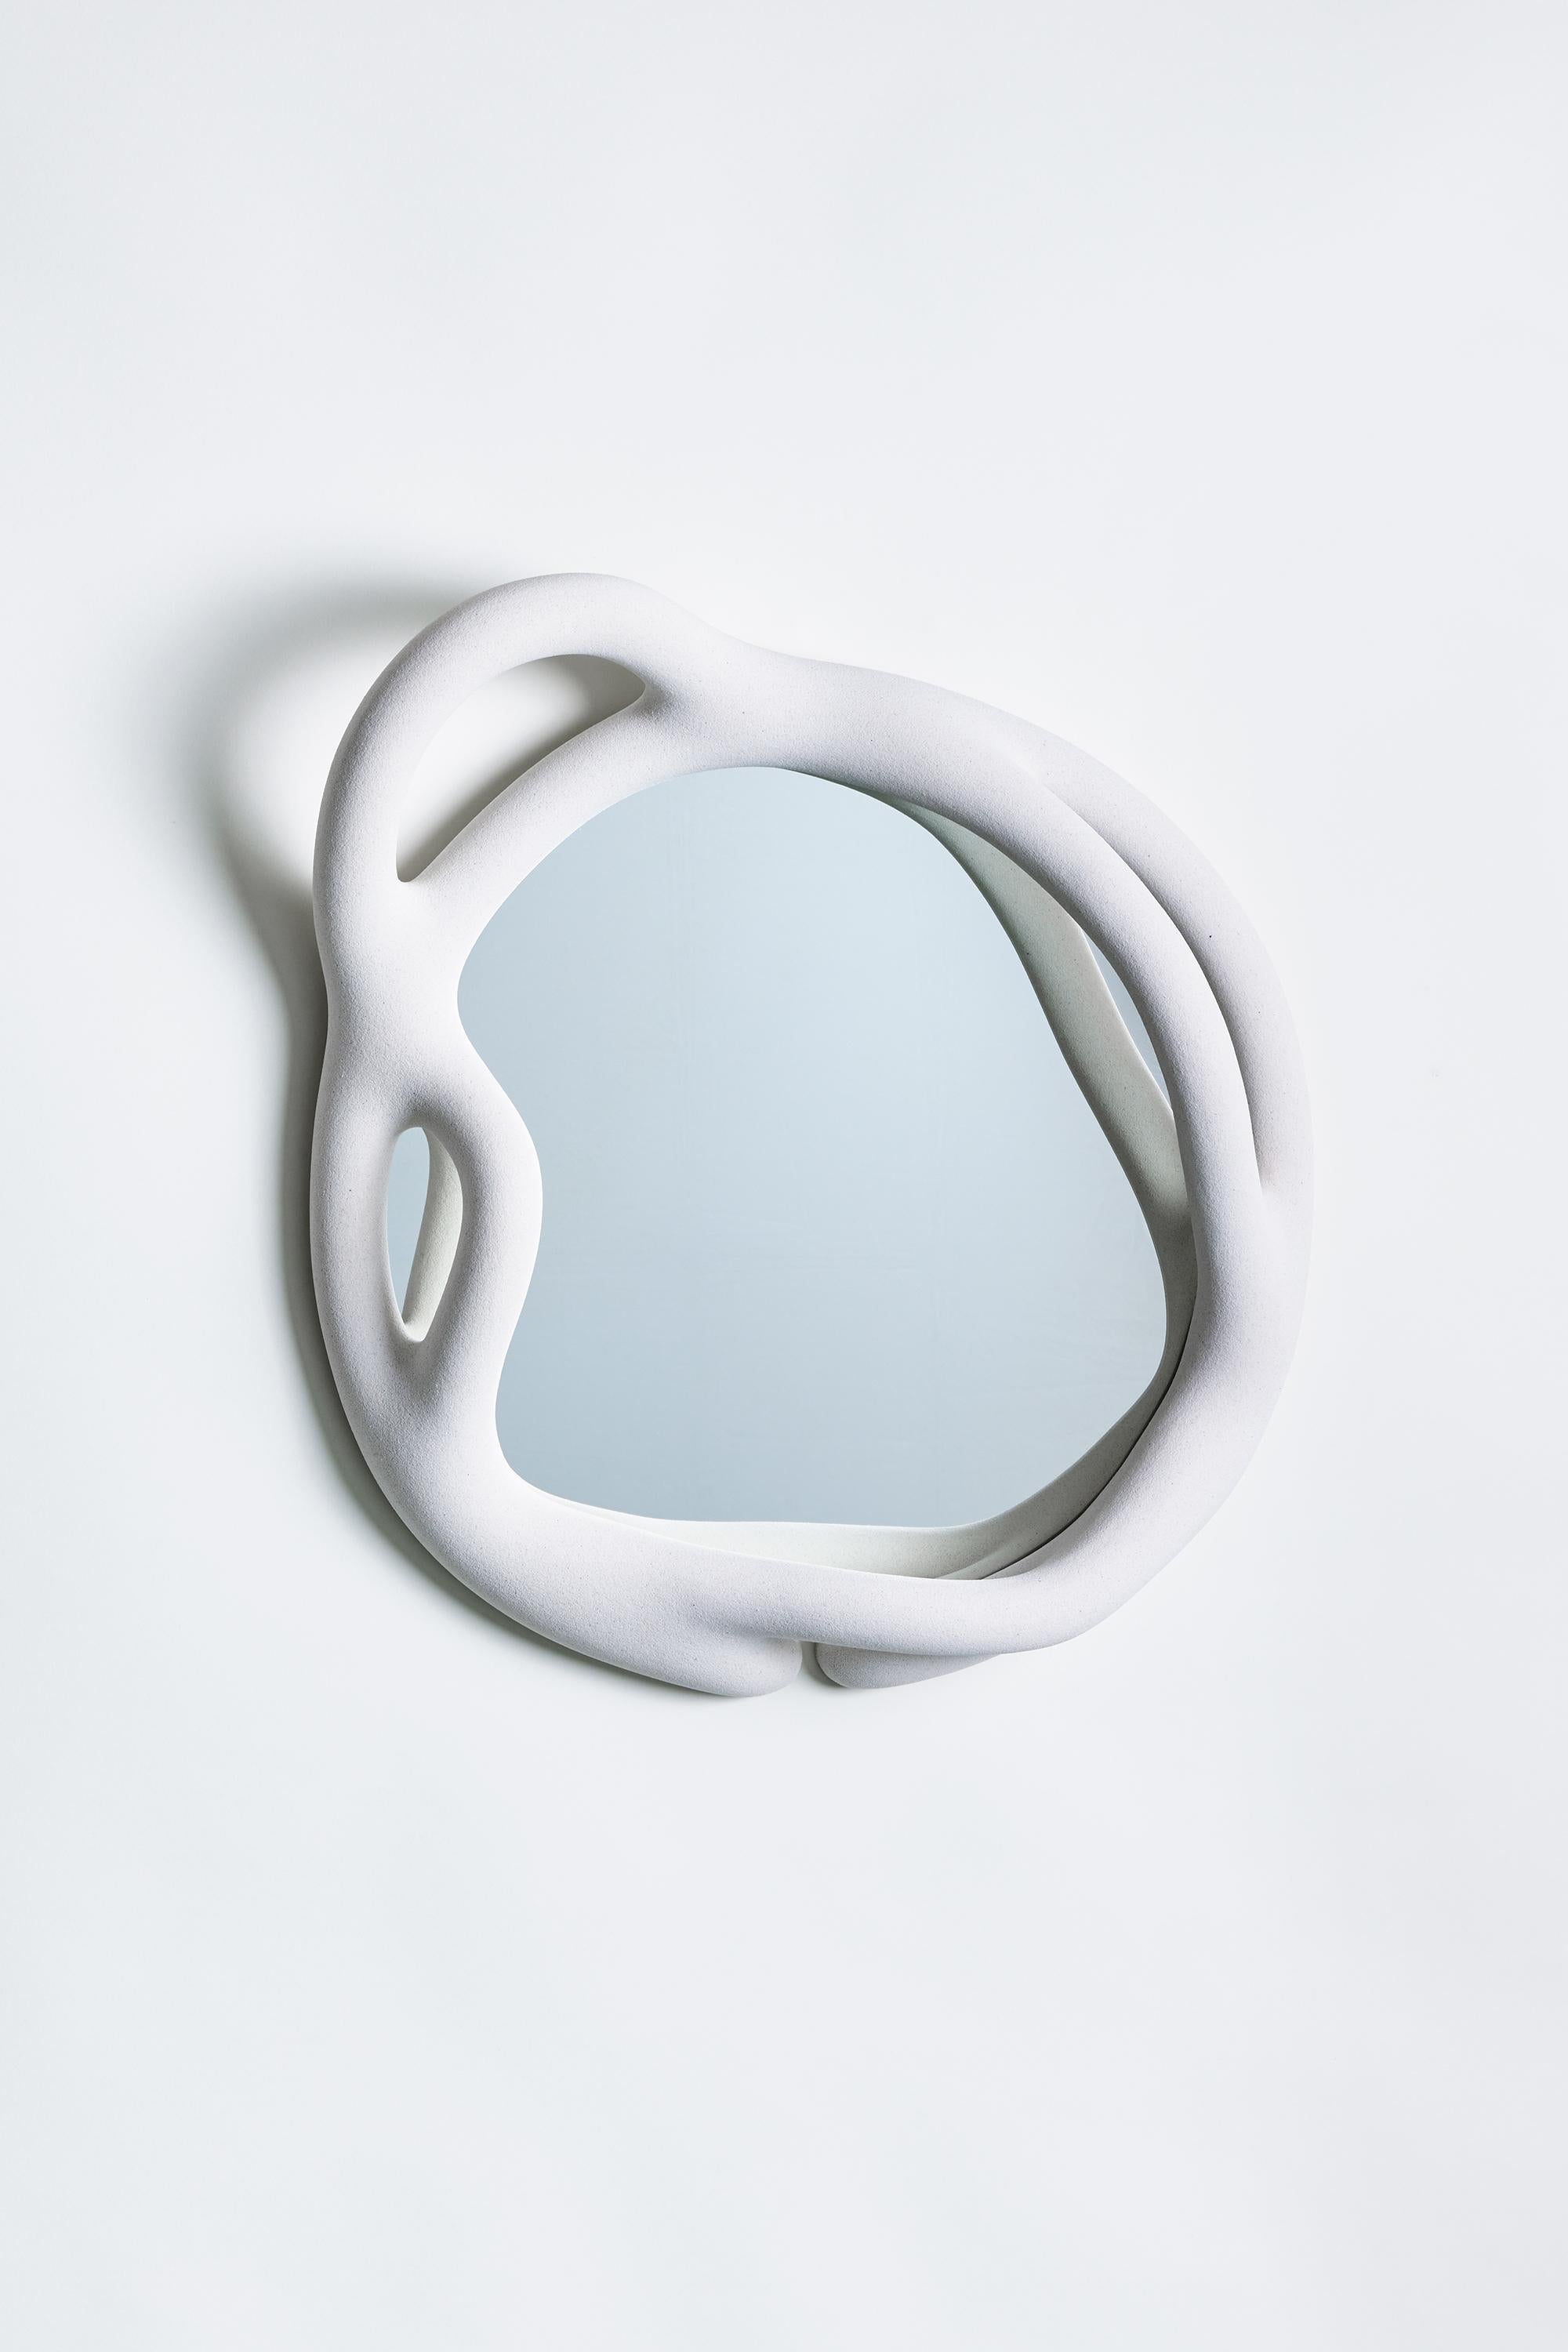 Medium White Portal Mirror by Hot Wire Extensions
Materials: Waste nylon powder, locally sourced natural white marble sand, copper pipe, mirror.
Dimensions: D 12.5 x W 61 x H 60 cm 
9 kg
Different dimensions, shapes, and colors upon request.

Hot